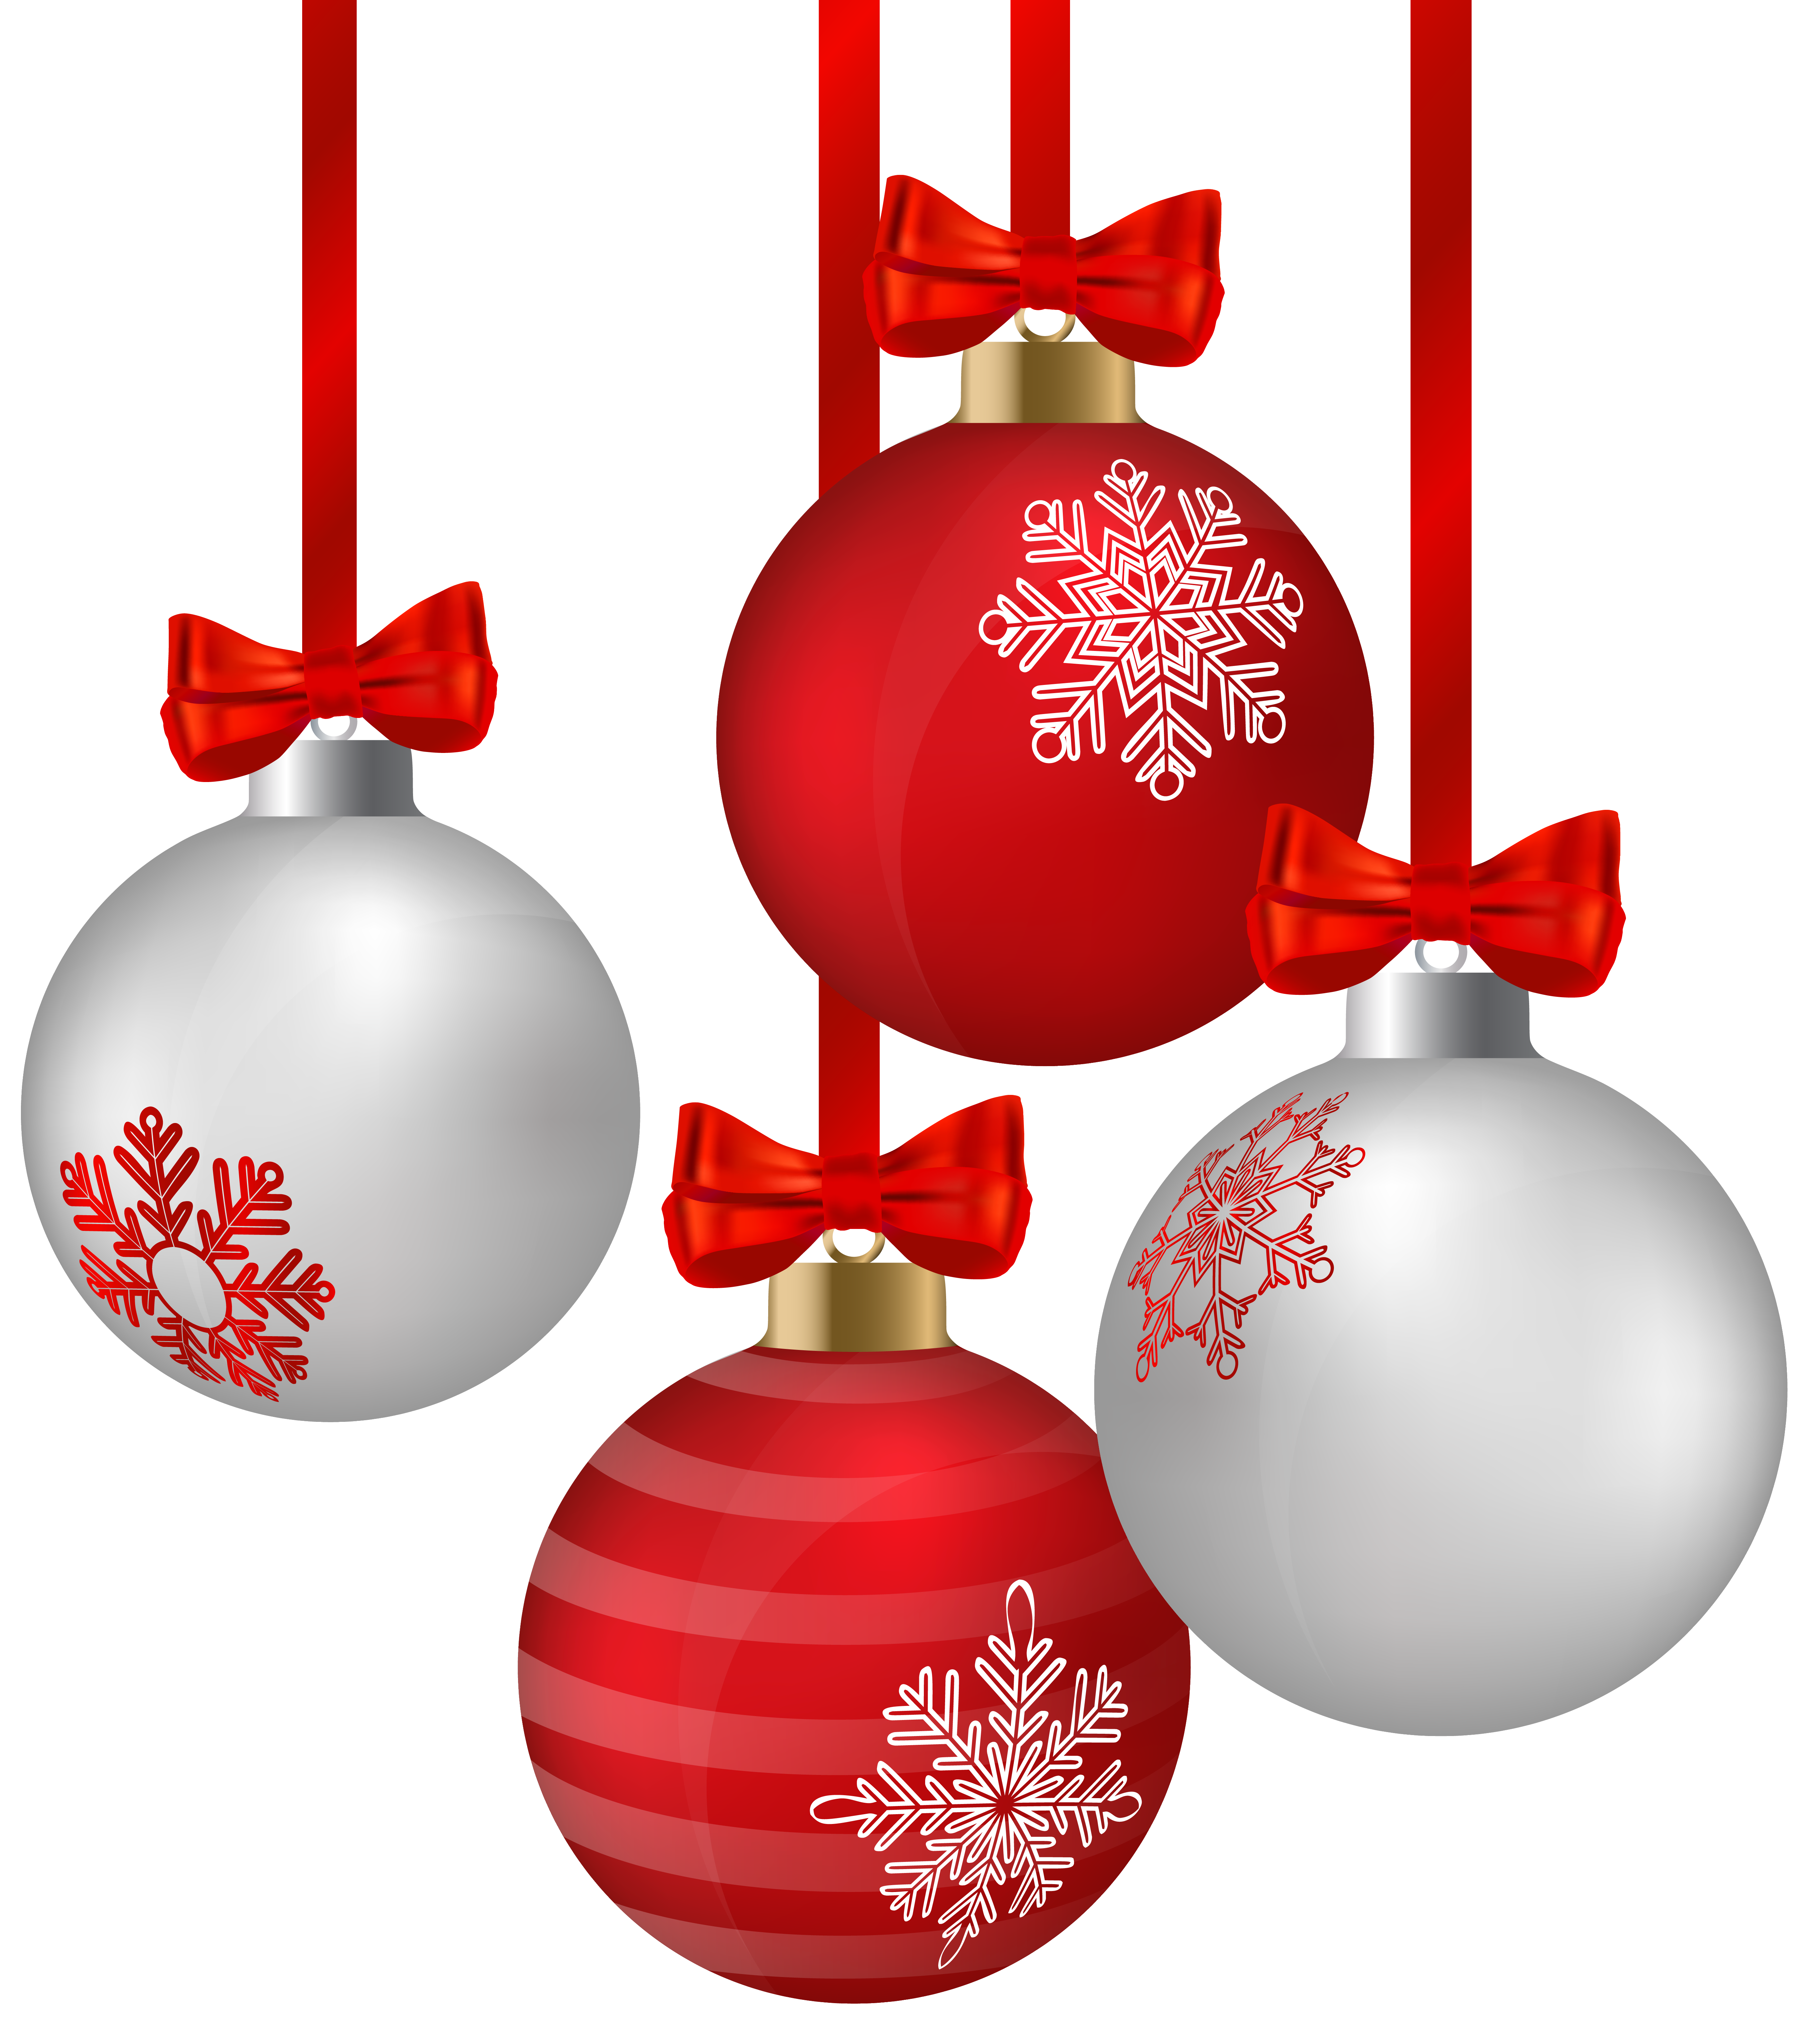 Red Christmas Ornament Clipart � Happy Holidays! happyholidaysblog